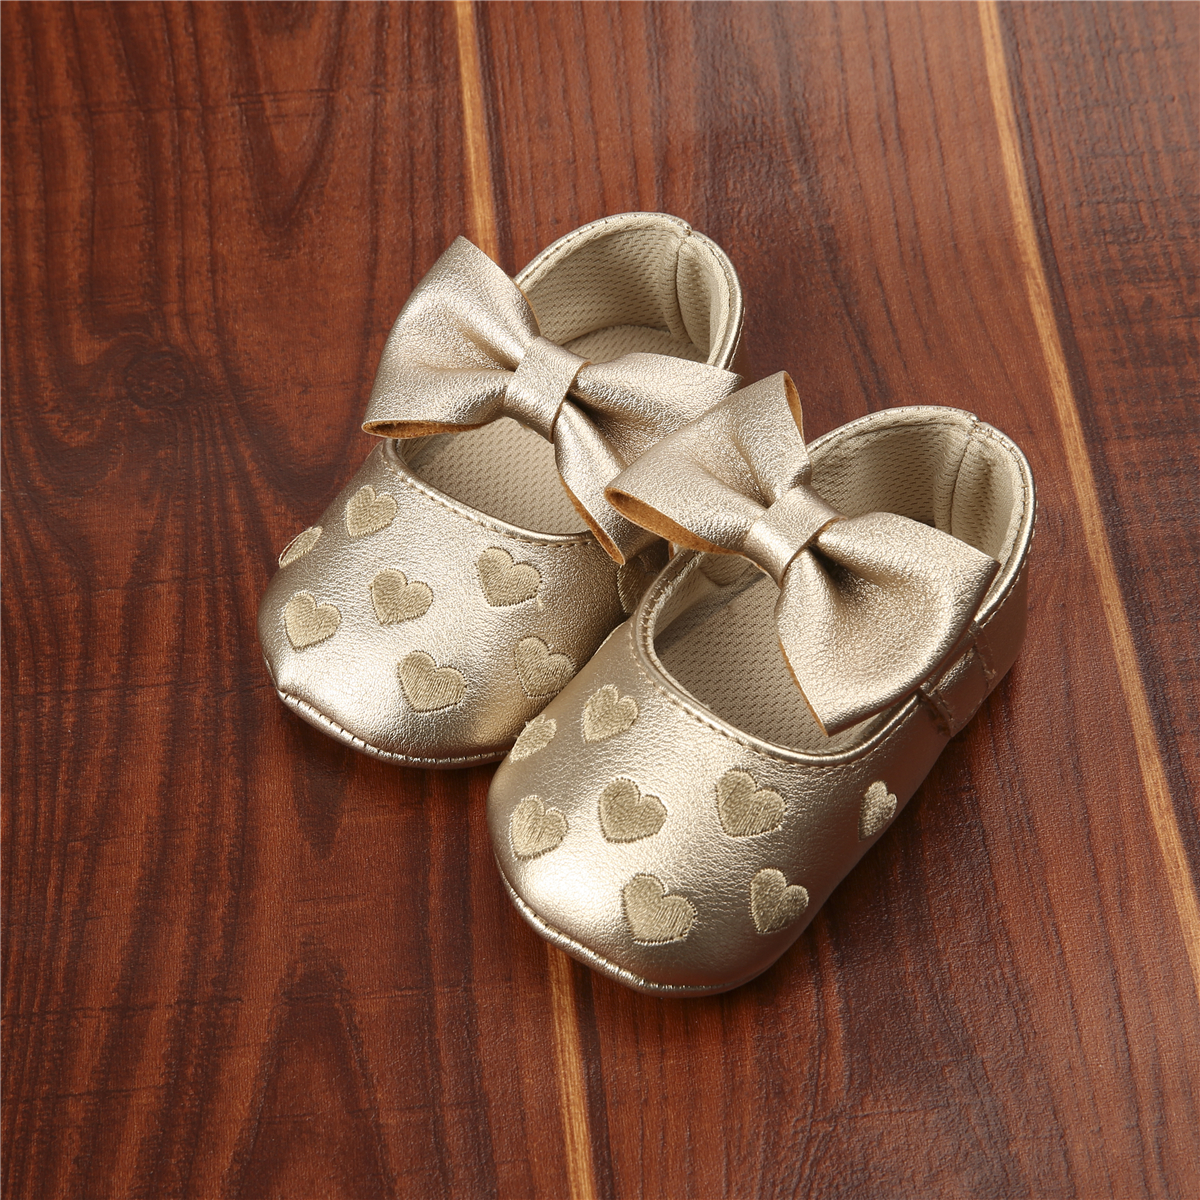 Musuos Girls Bowknot Moccasins, Soft Sole Crib Shoes, Anti-slip Shoes - image 2 of 4